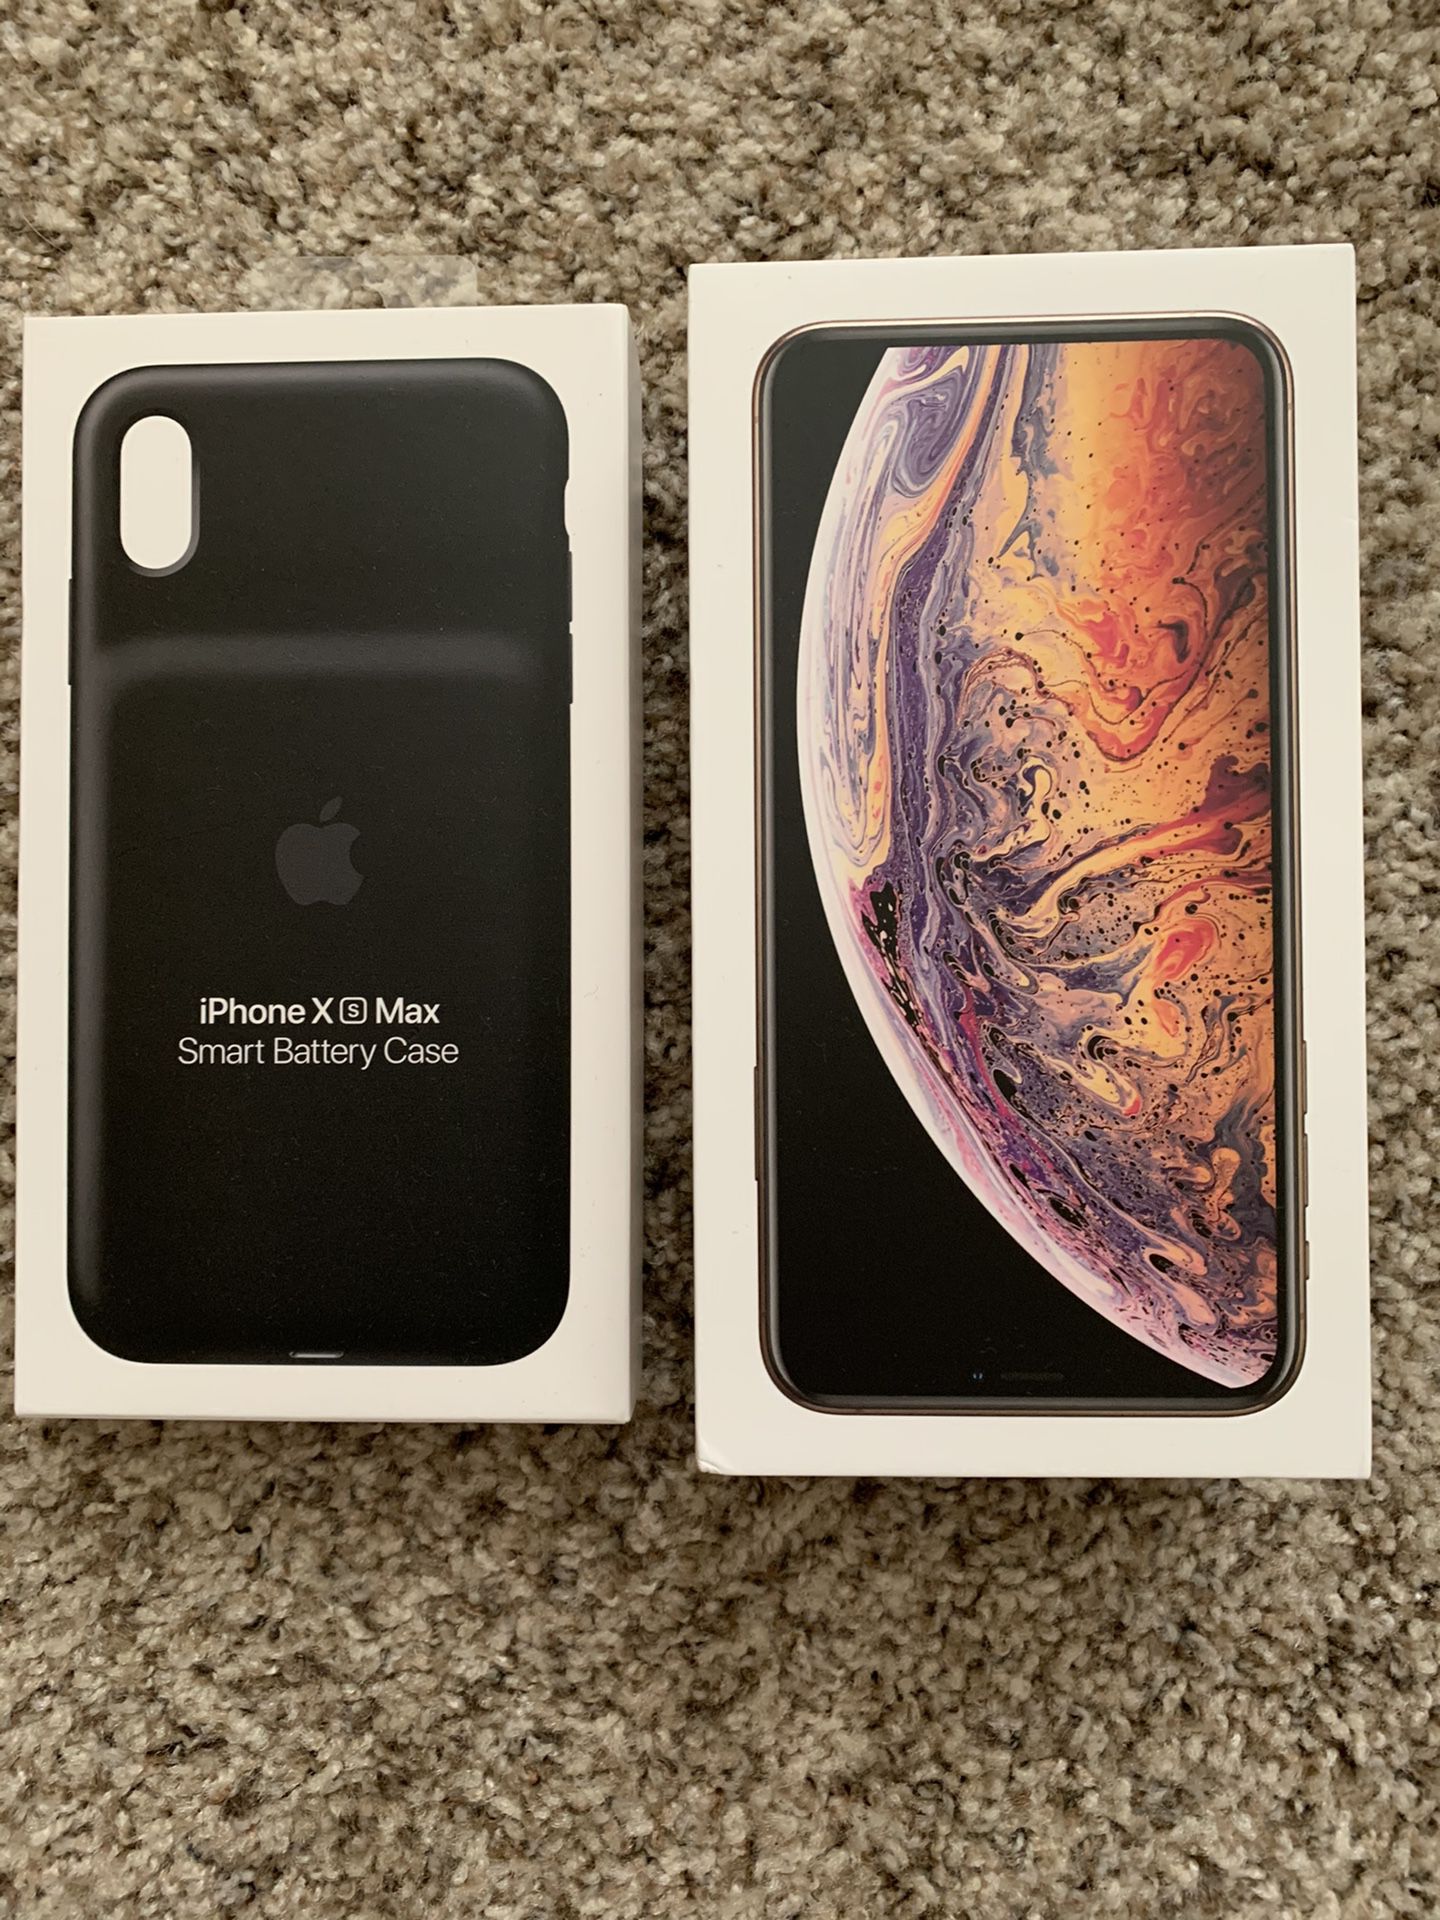 iPhone XS Max 512 GB UNLOCKED GOLD with Smart Battery Case NEW